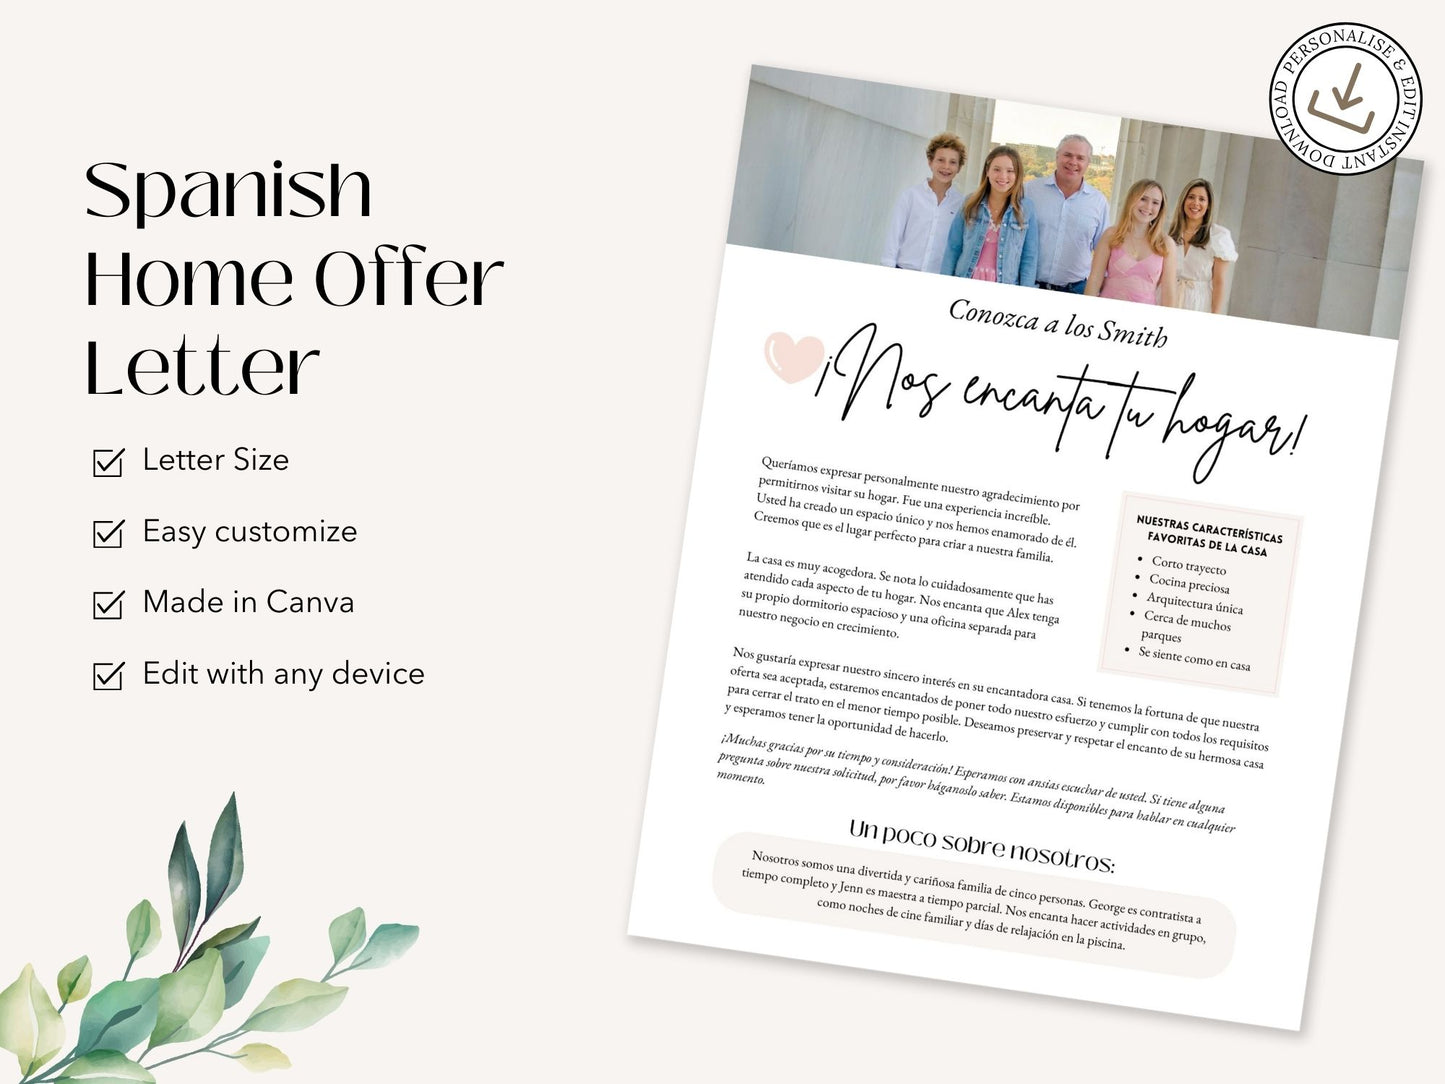 Spanish Home Offer Letter Vol 01 - Make a lasting impression when presenting a purchase offer in Spanish.